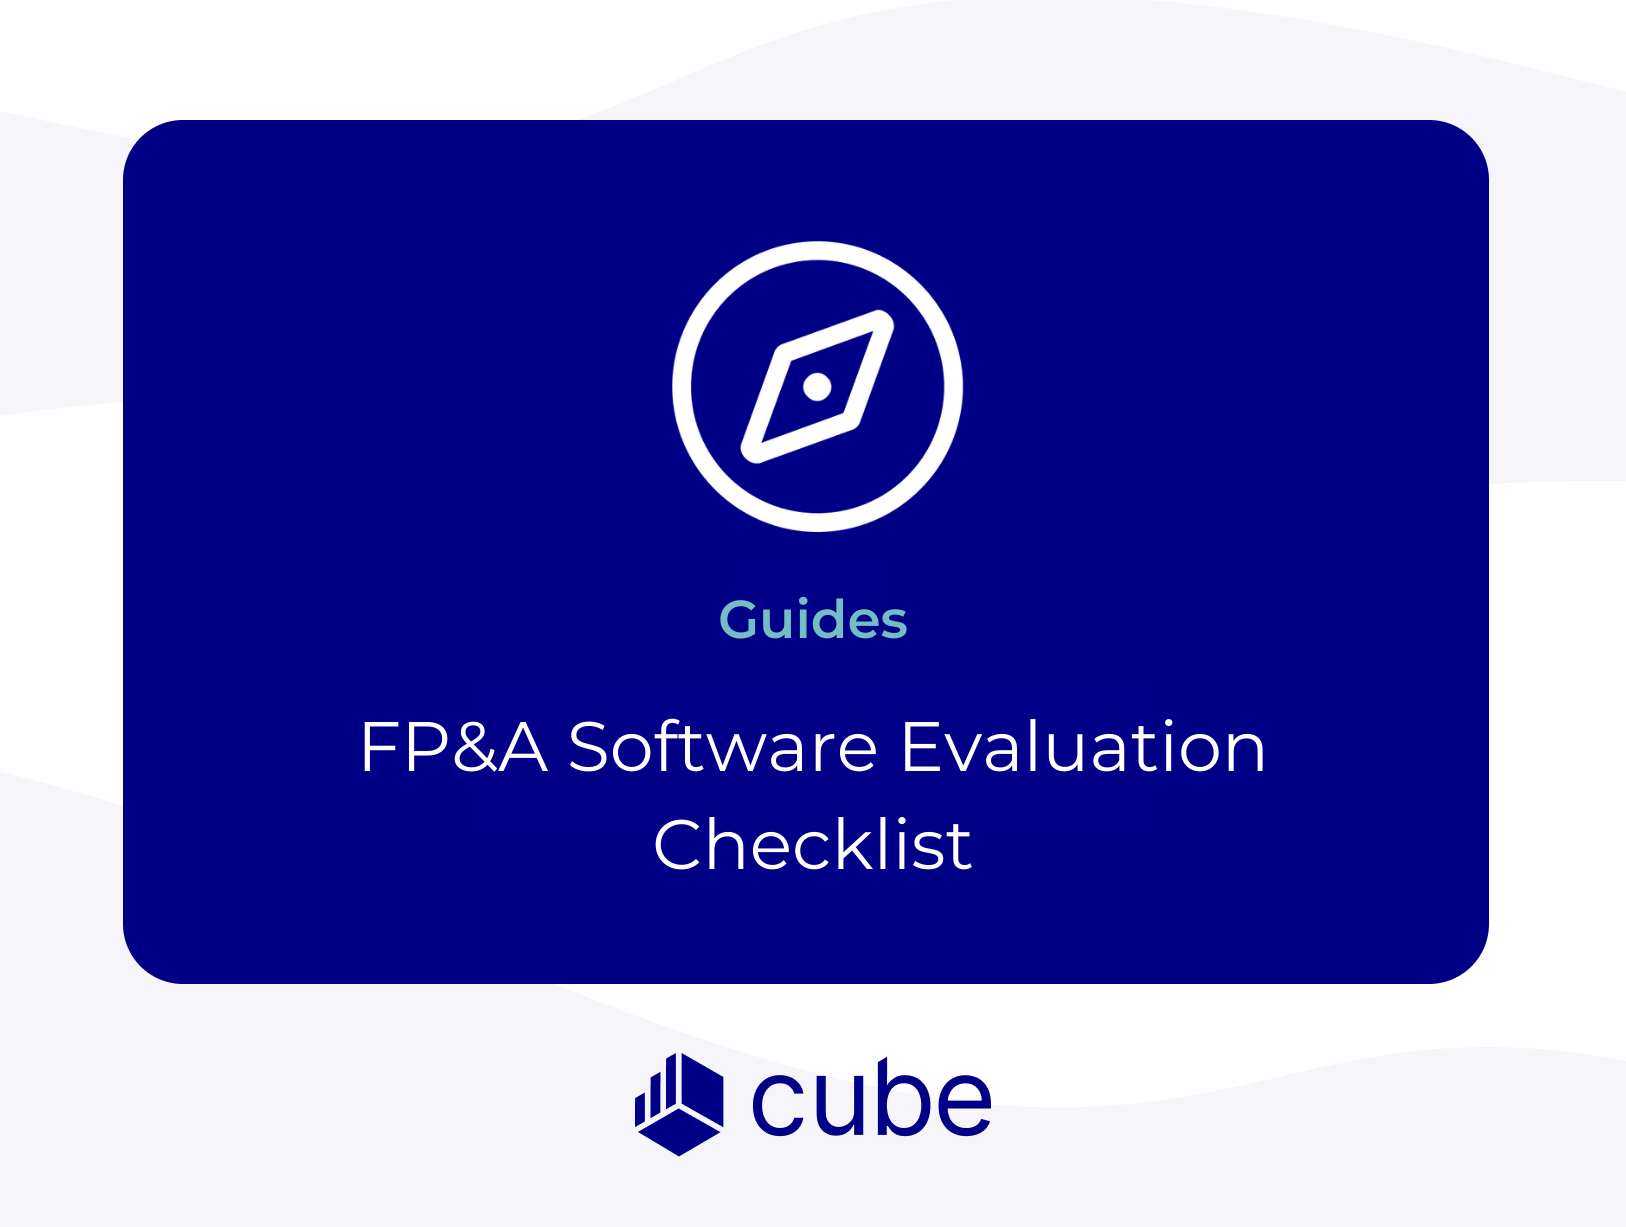 The Complete FP&A Software Evaluation Checklist for 2022